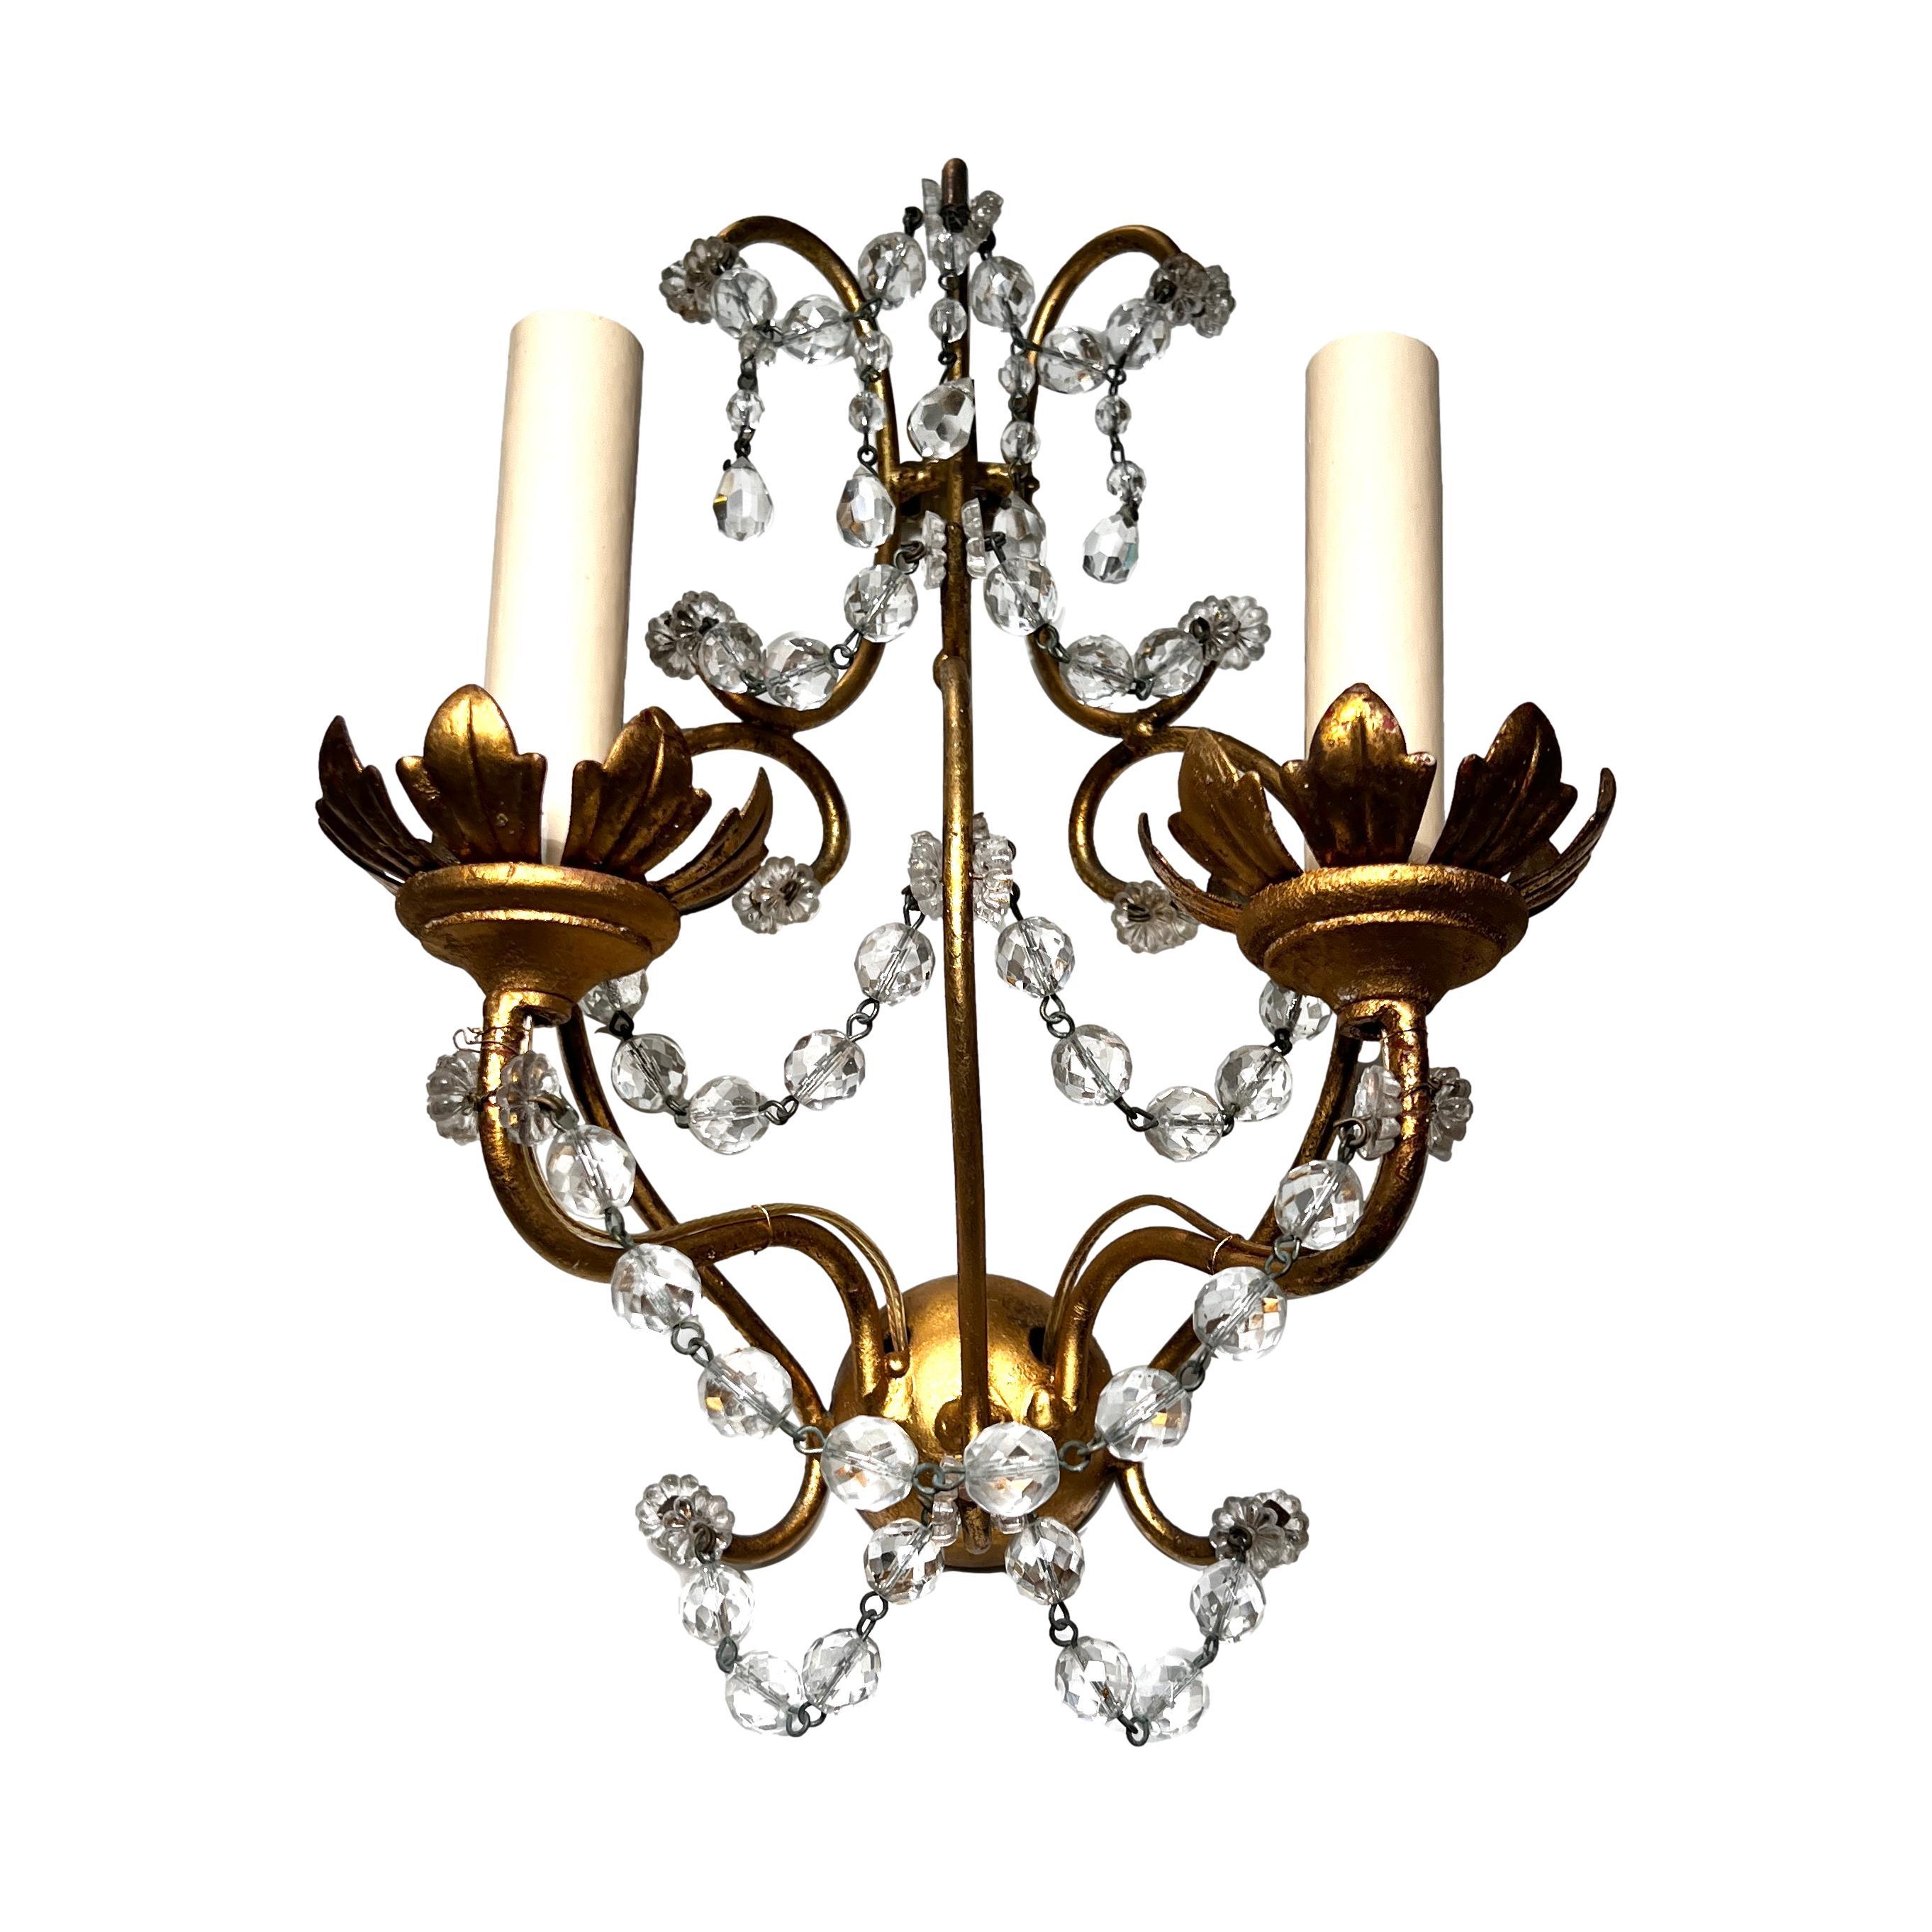 A set of 3 circa 1920s Italian gilt metal sconces with crystals. Sold individually.

Measurements:
Height: 13